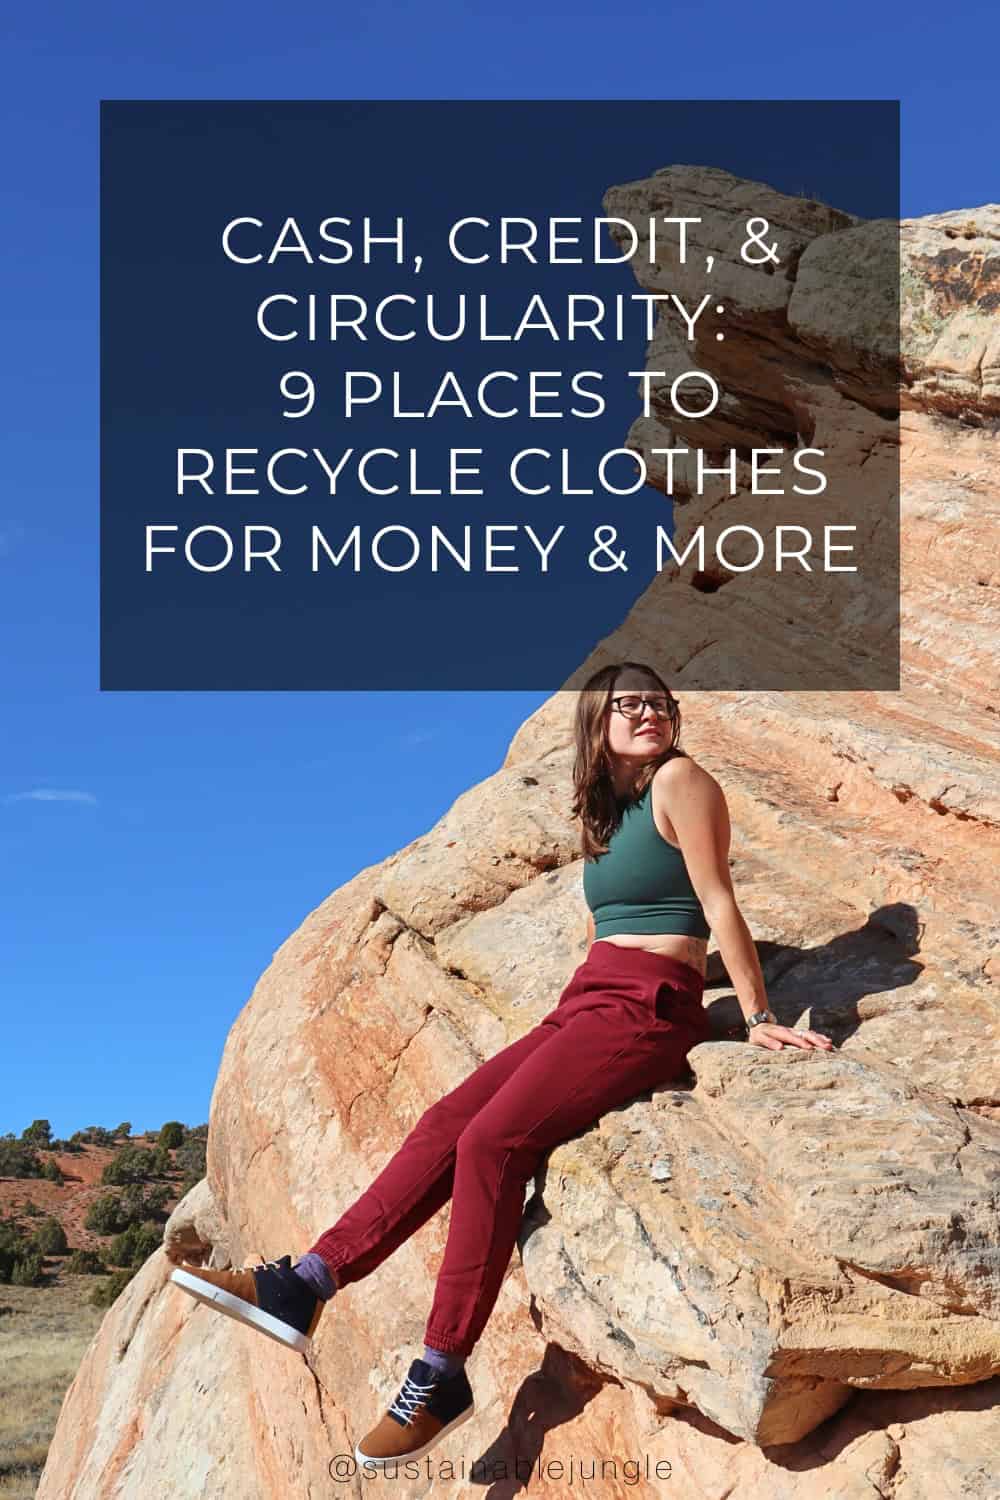 Cash, Credit, & Circularity: 9 Places To Recycle Clothes For Money & More Image by Sustainable Jungle #recycleclothesformoney #recycleclothesforcash #clothingrecyclingprograms #recyclefashion #clothingtakebackprograms #howtorecycleclothesformoney #sustainablejungle